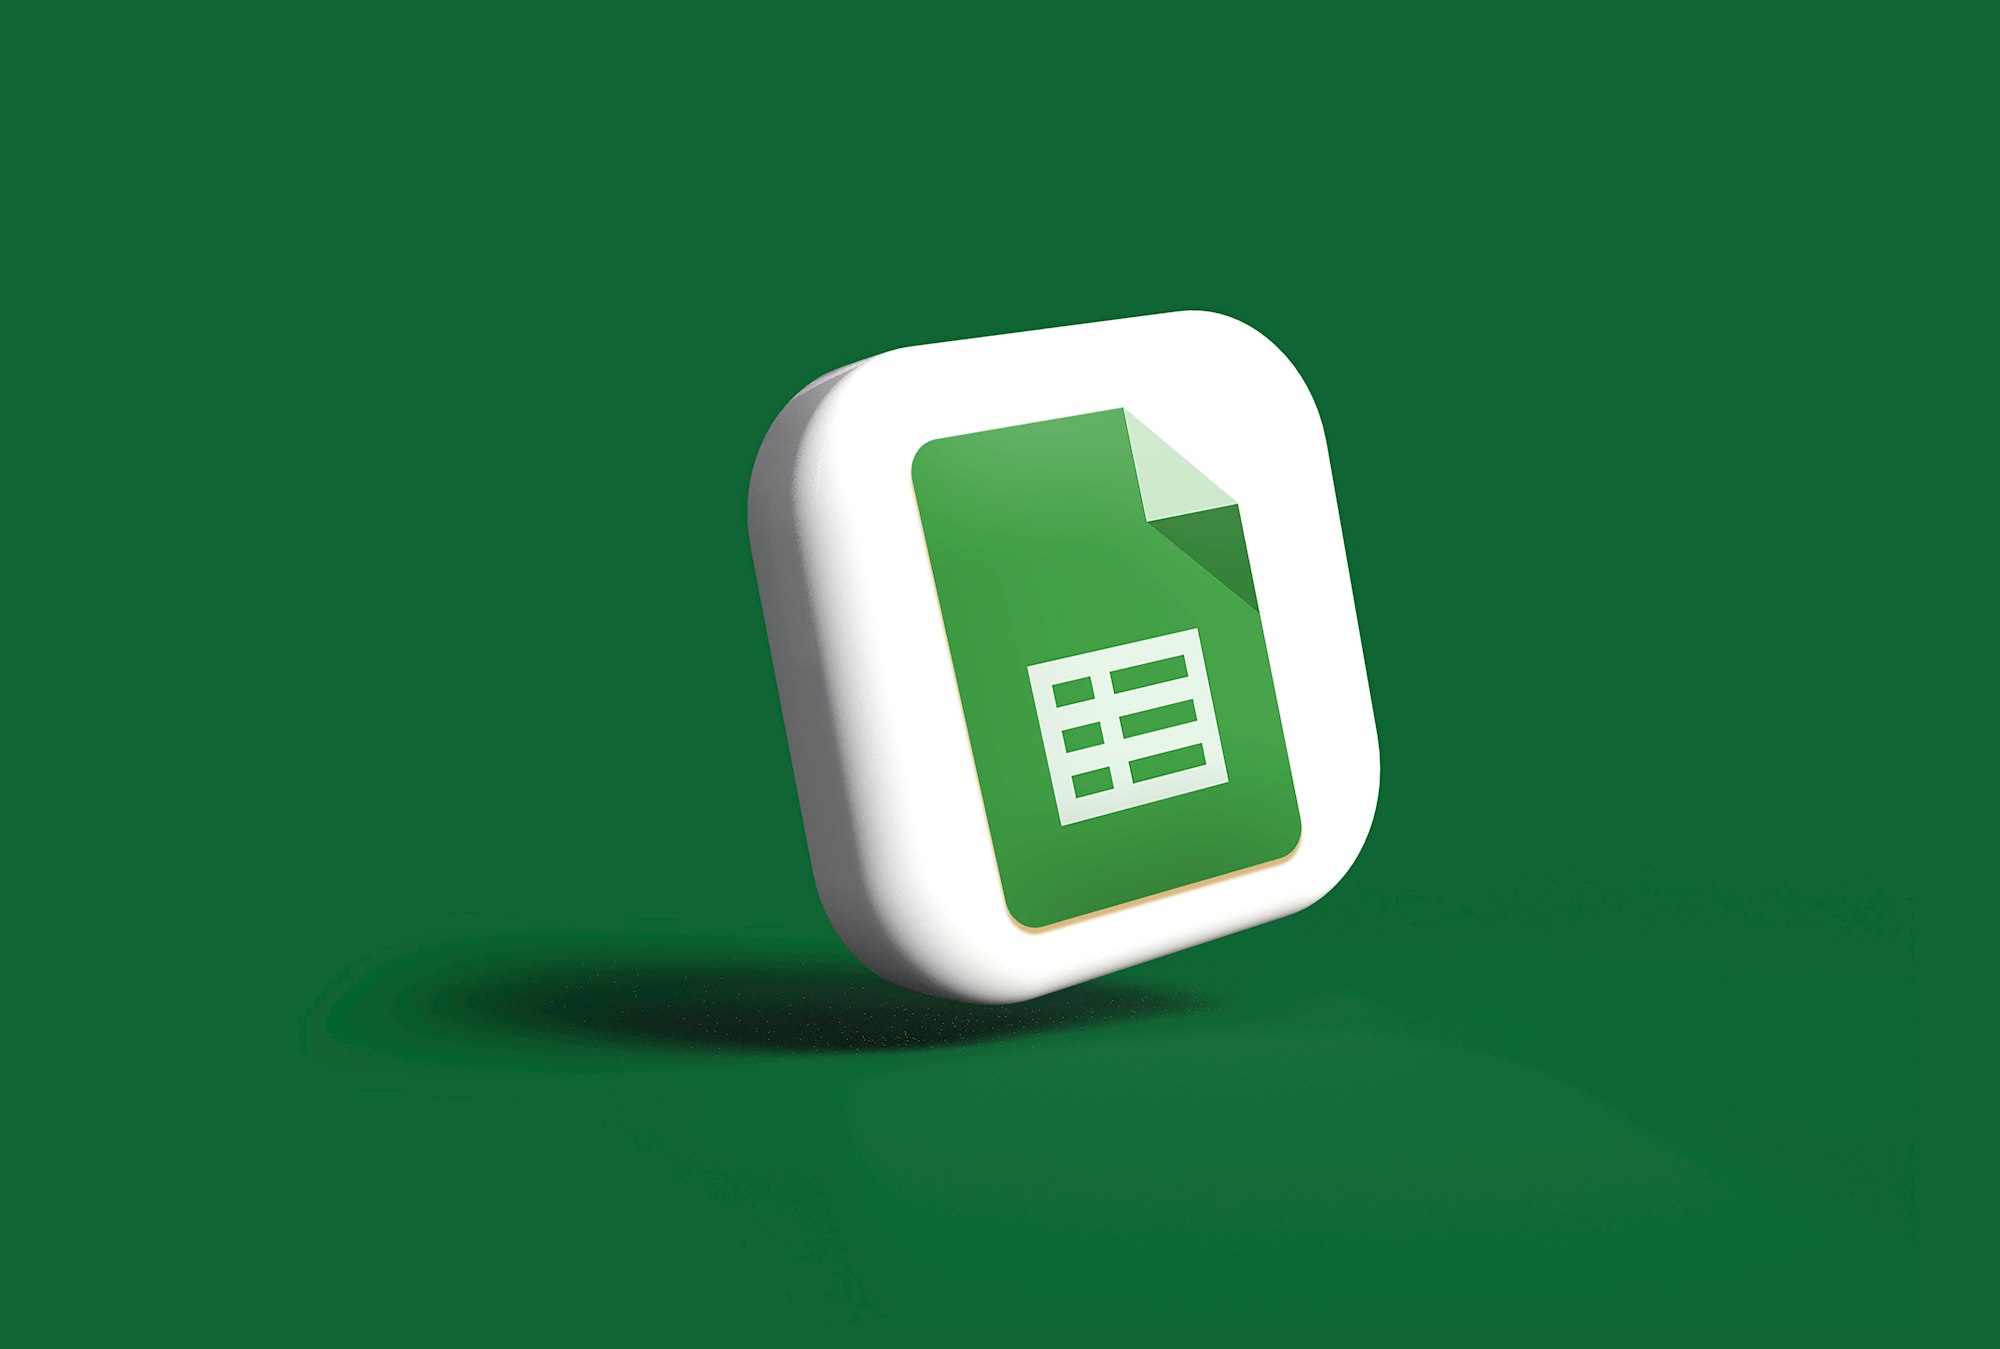 Google Sheets icon in 3D. My 3D work may be seen in the section titled "3D Render."